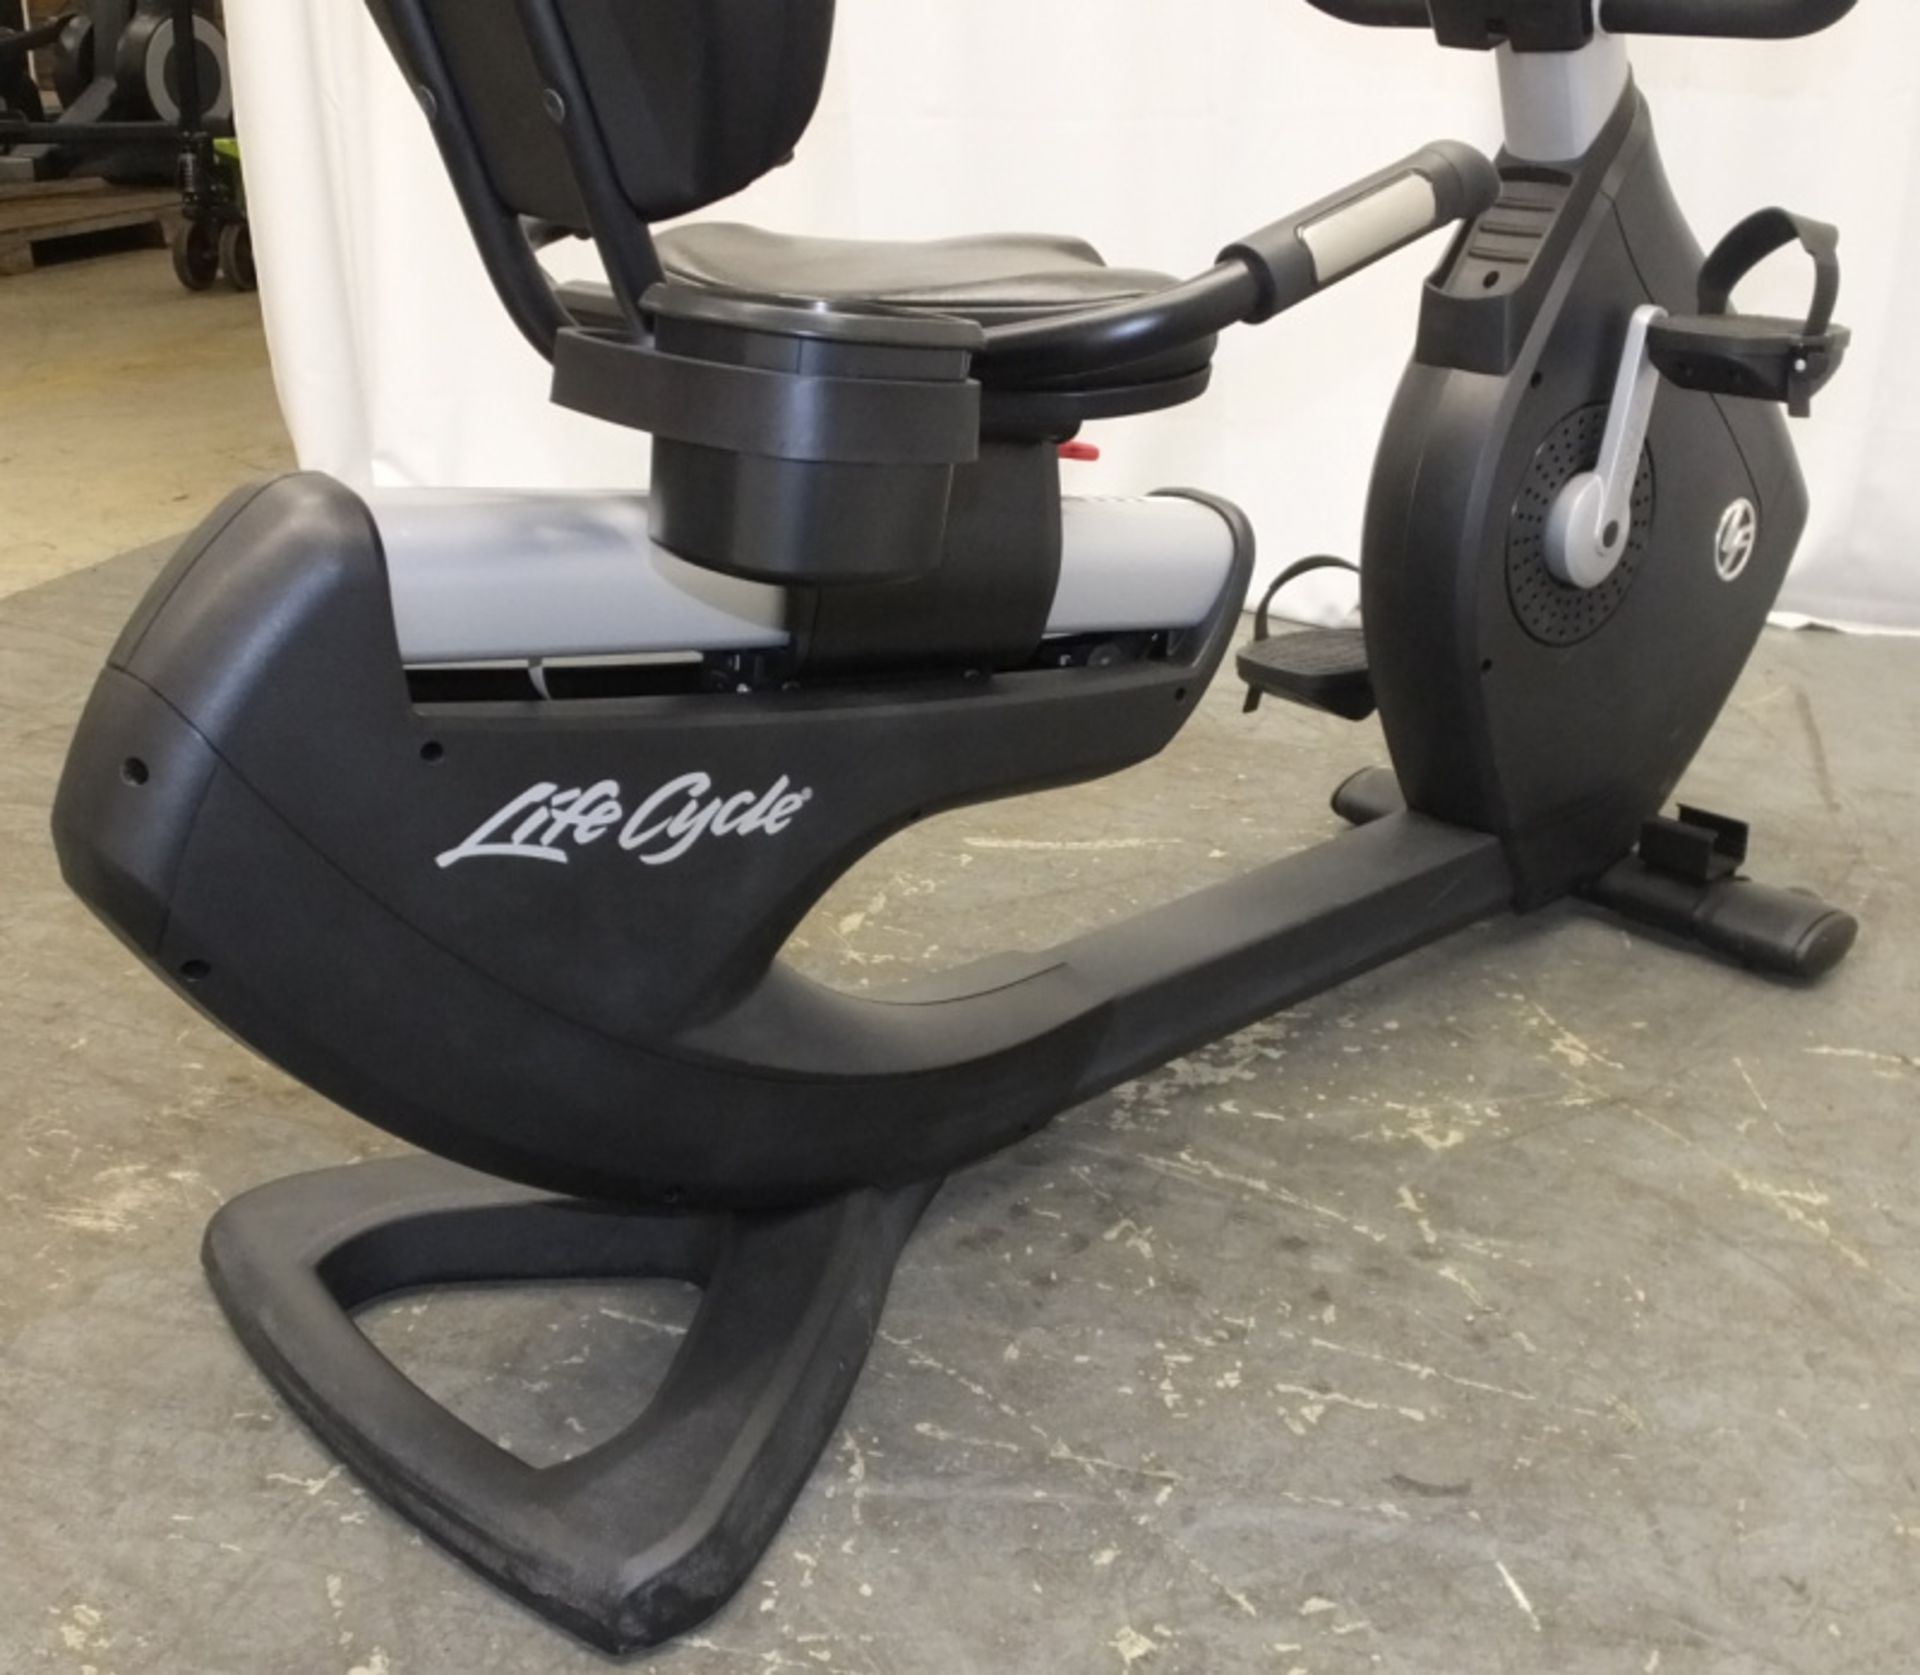 Life Fitness Life Cycle 95RS Recumbent Exercise Bike - Missing Power Pack - Image 6 of 9